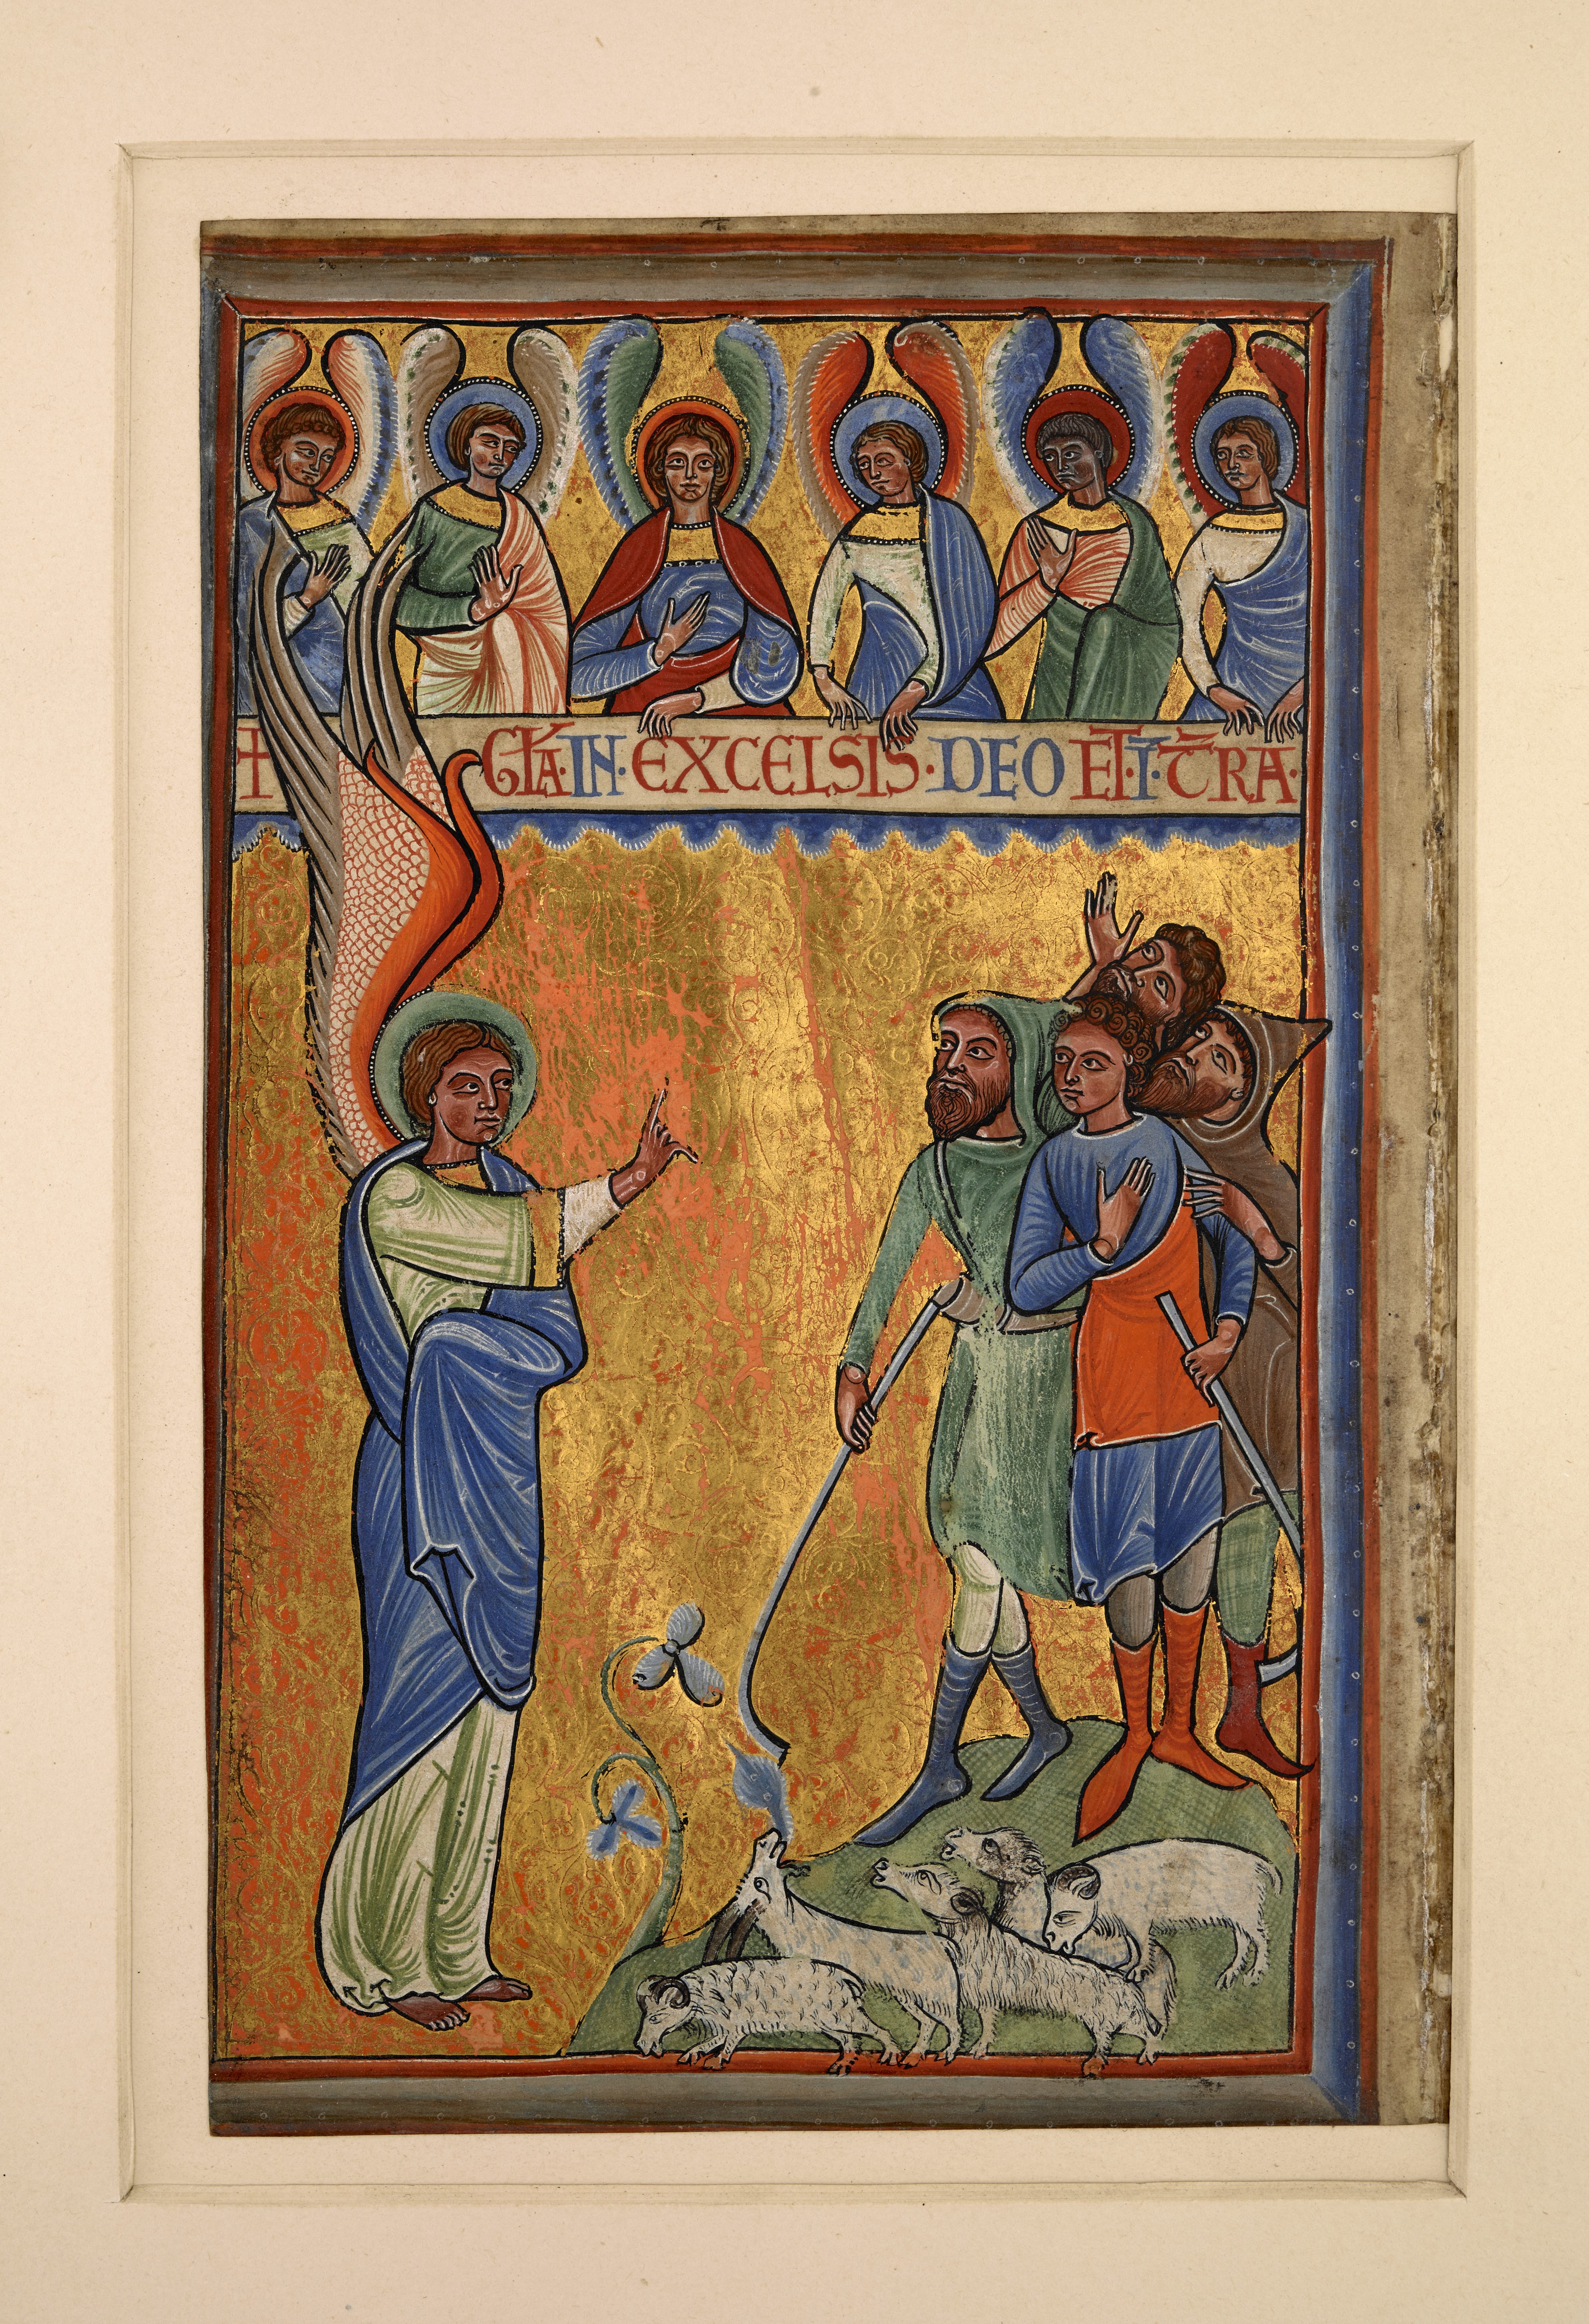 Annunciation to the Shepherds, twelfth century psalter